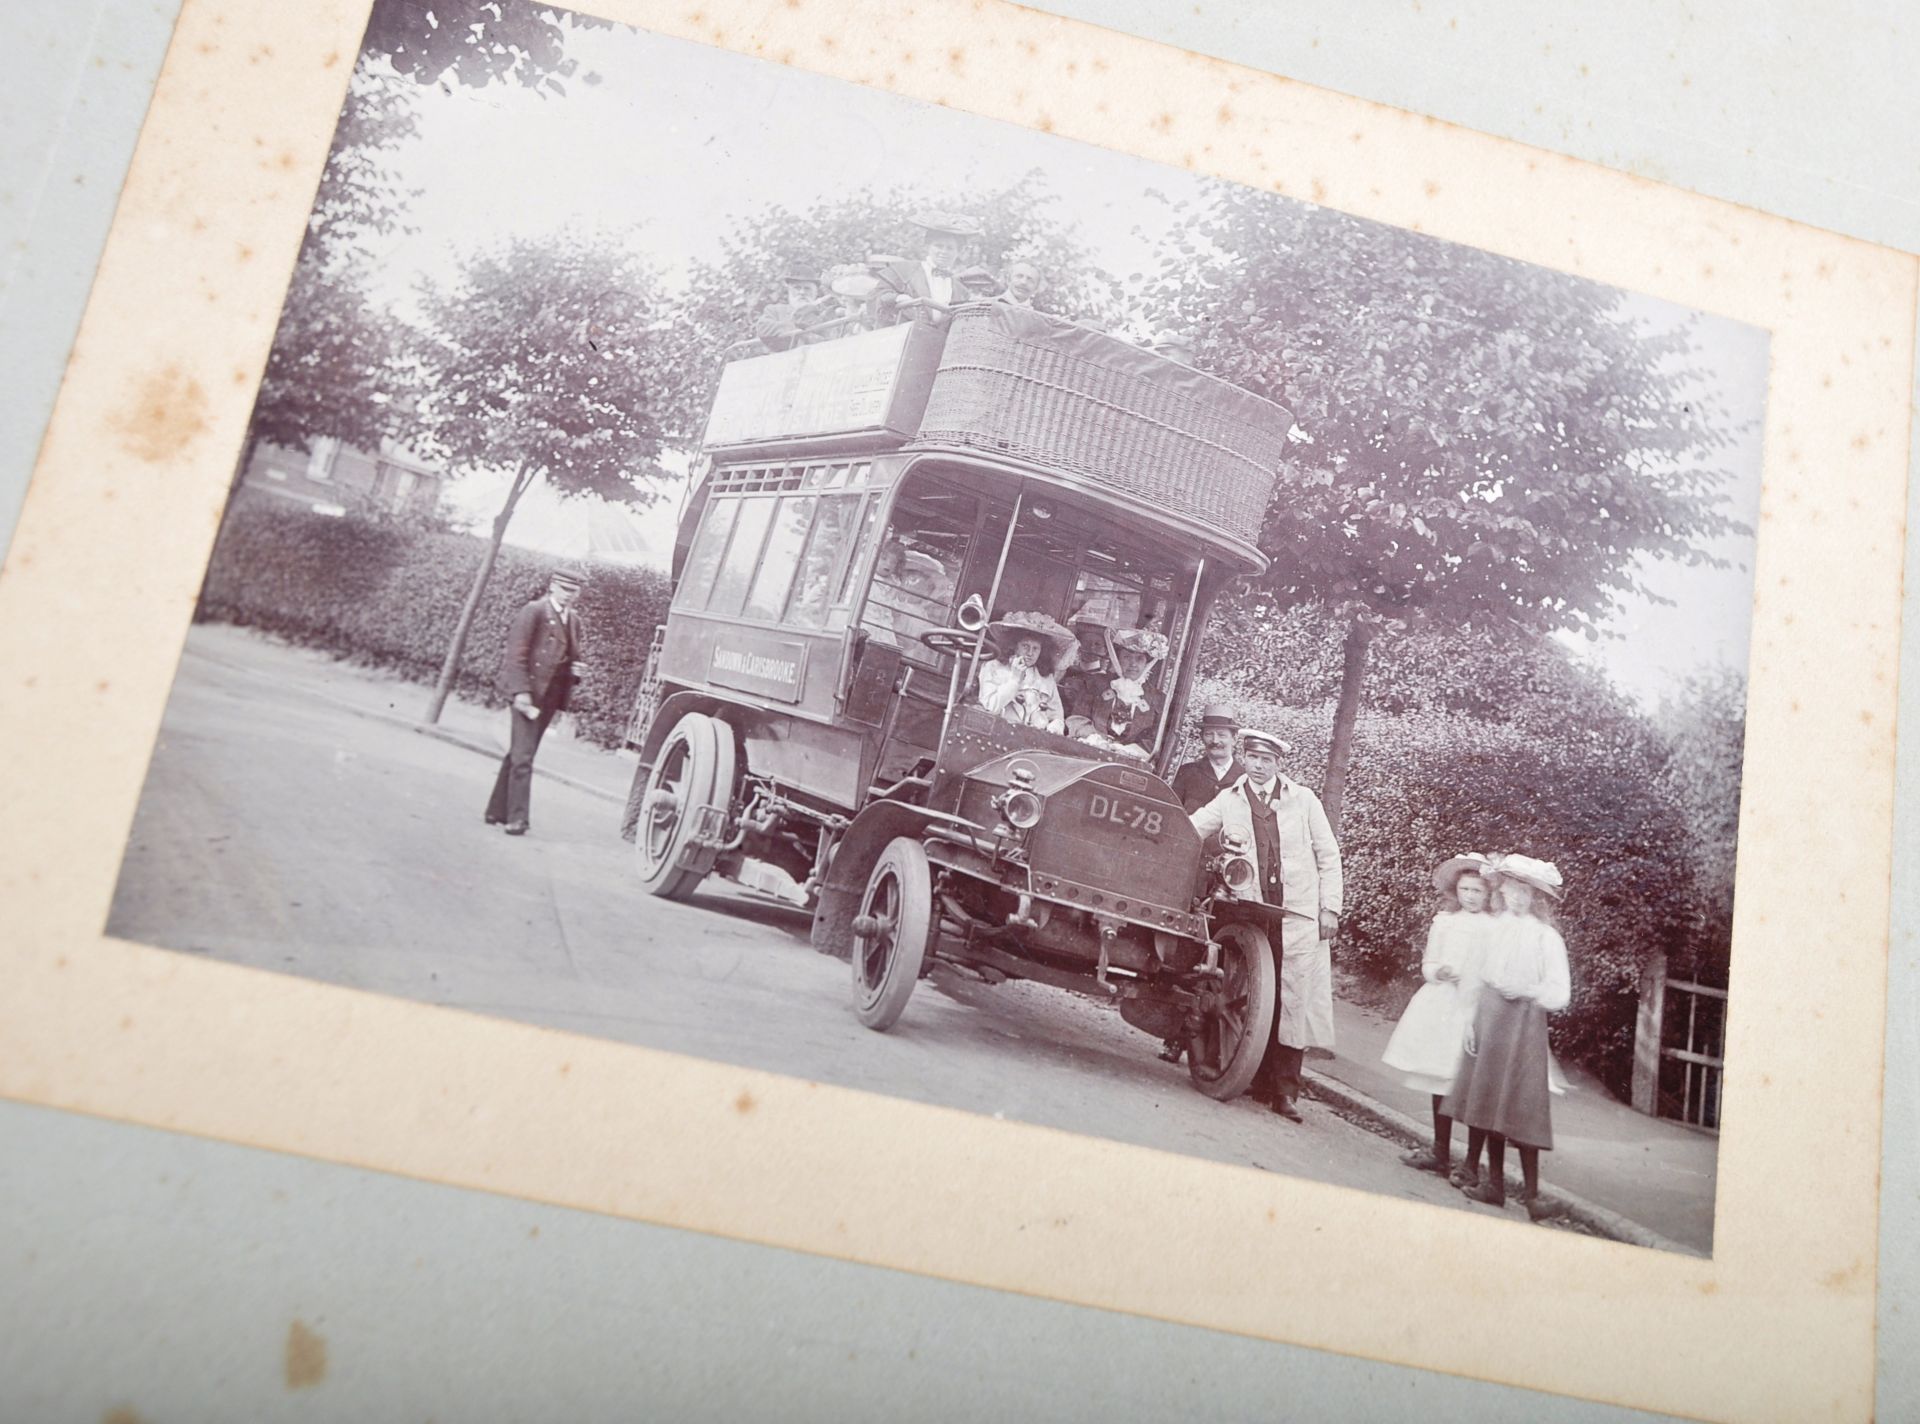 EARLY 20TH CENTURY BUS PHOTOGRAPHS - ISLE OF WIGHT - Image 7 of 7